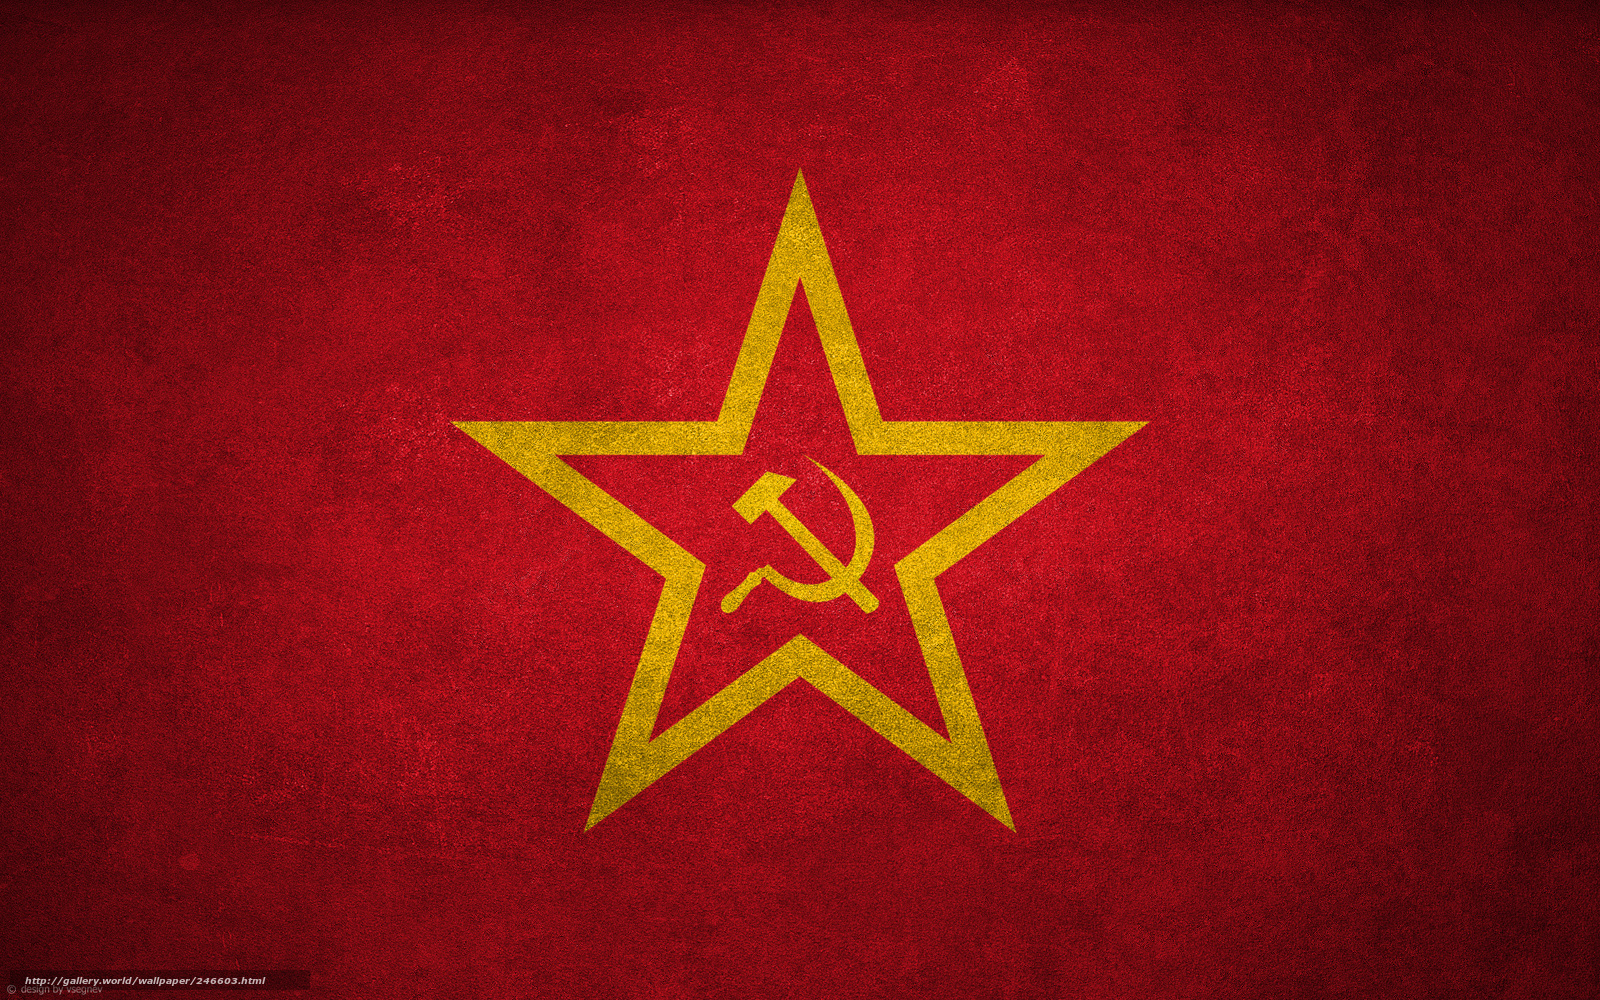 Download wallpaper USSR, star, hammer and sickle, flag free desktop wallpaper in the resolution 1920x1200